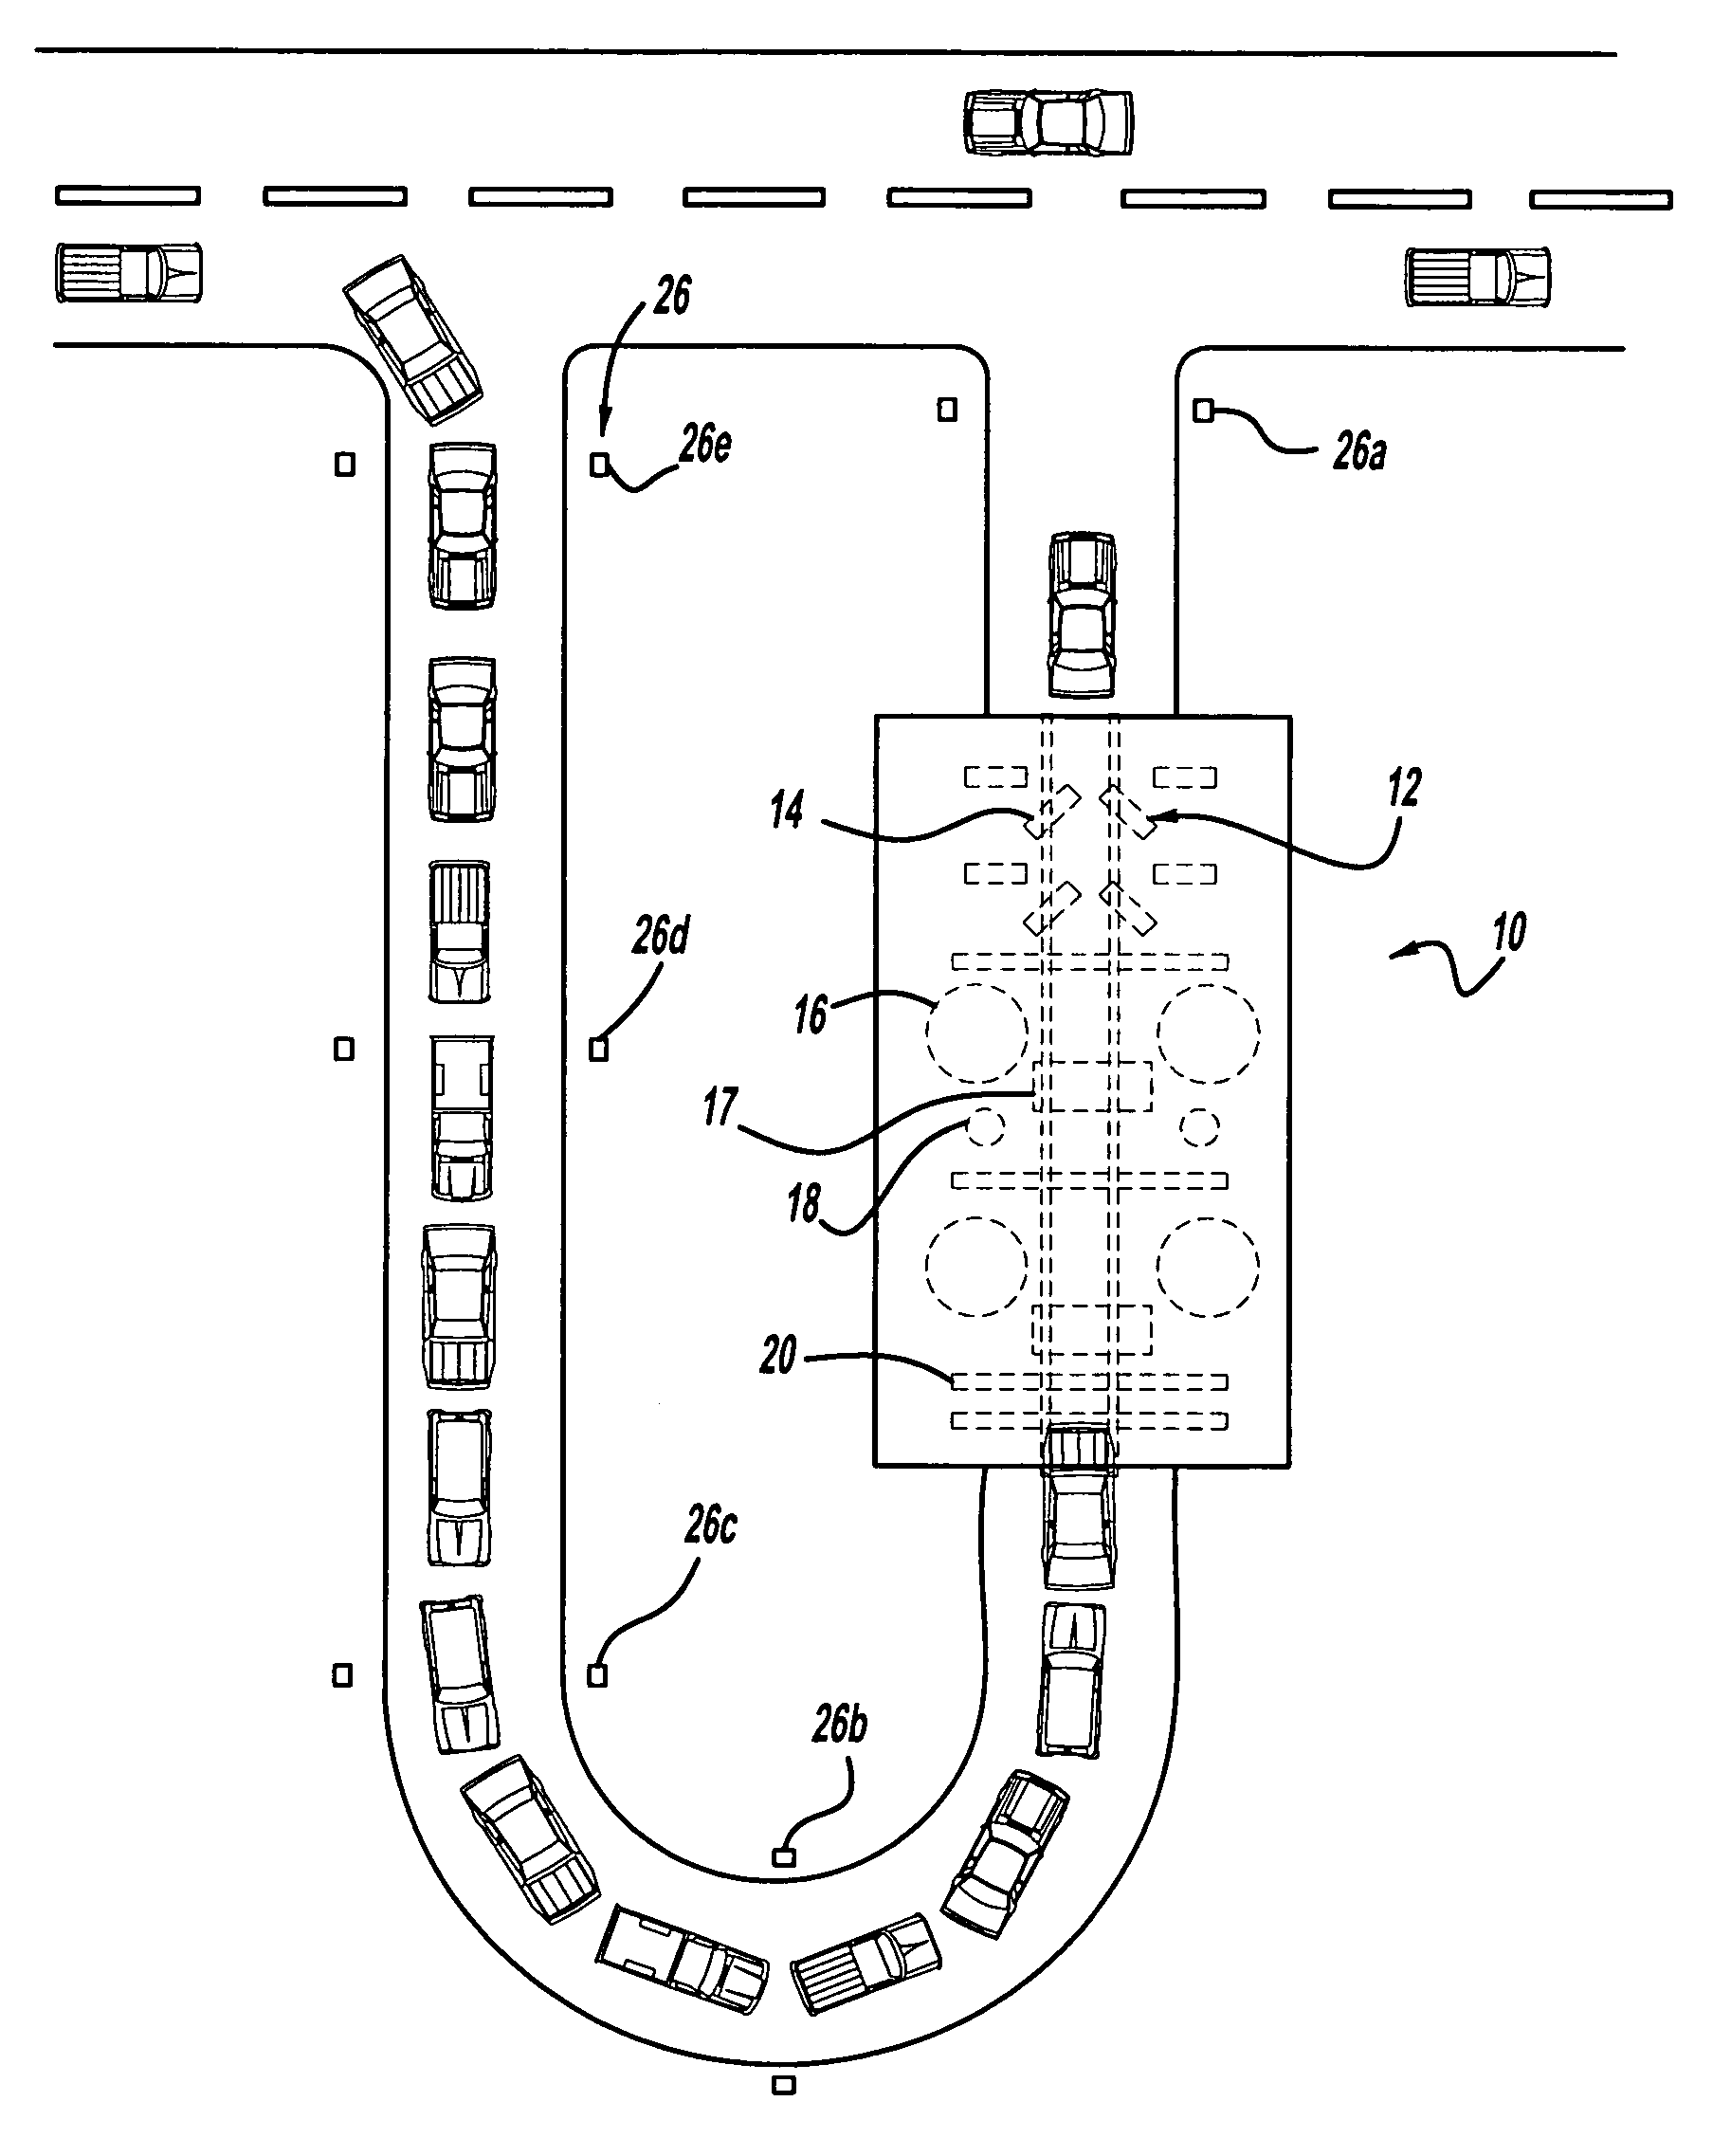 Control system for vehicle washing system